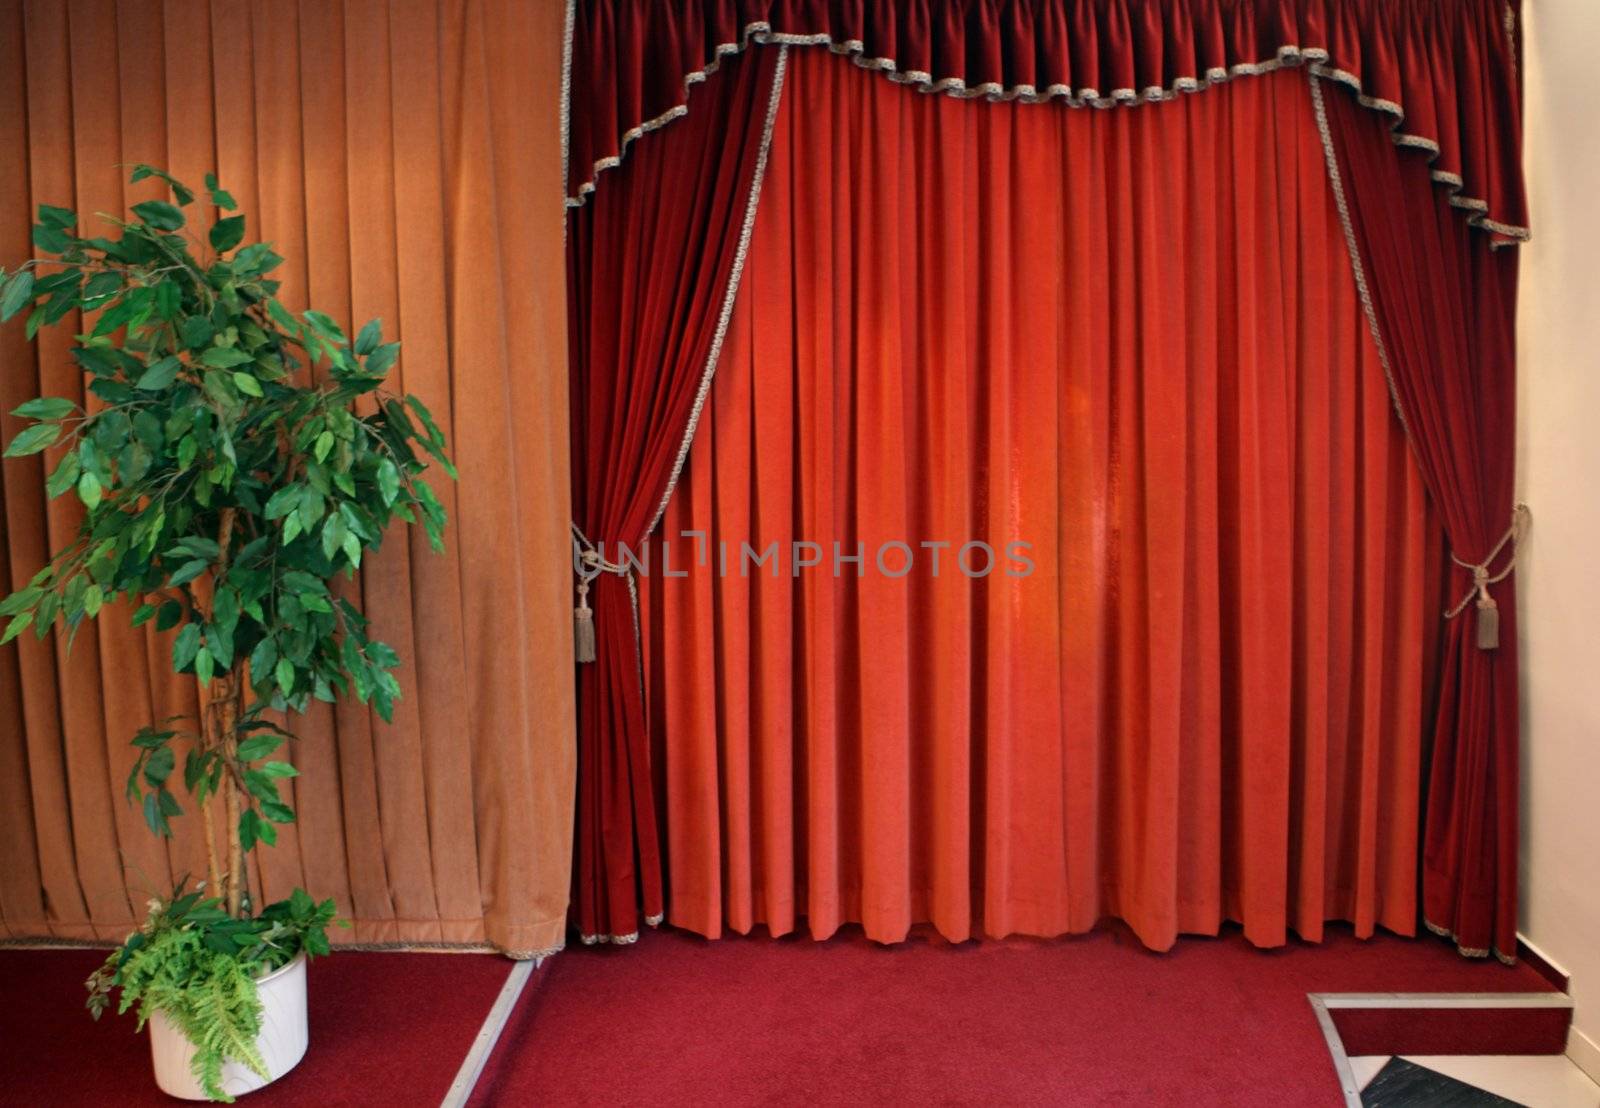 Red curtain inside the hall and flower pot